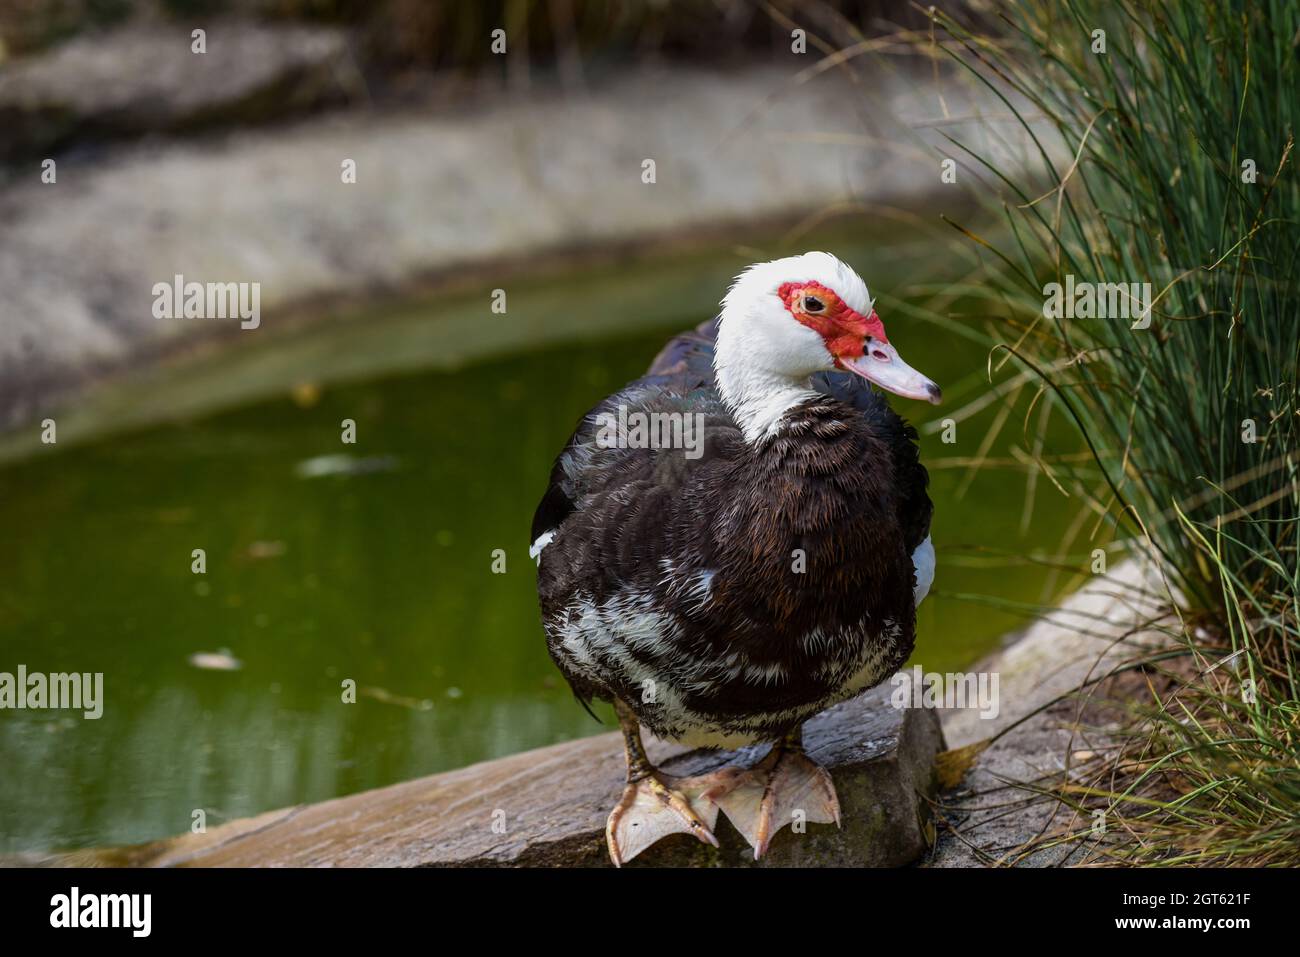 Muscovy Duck with red face and black and white feathers Stock Photo